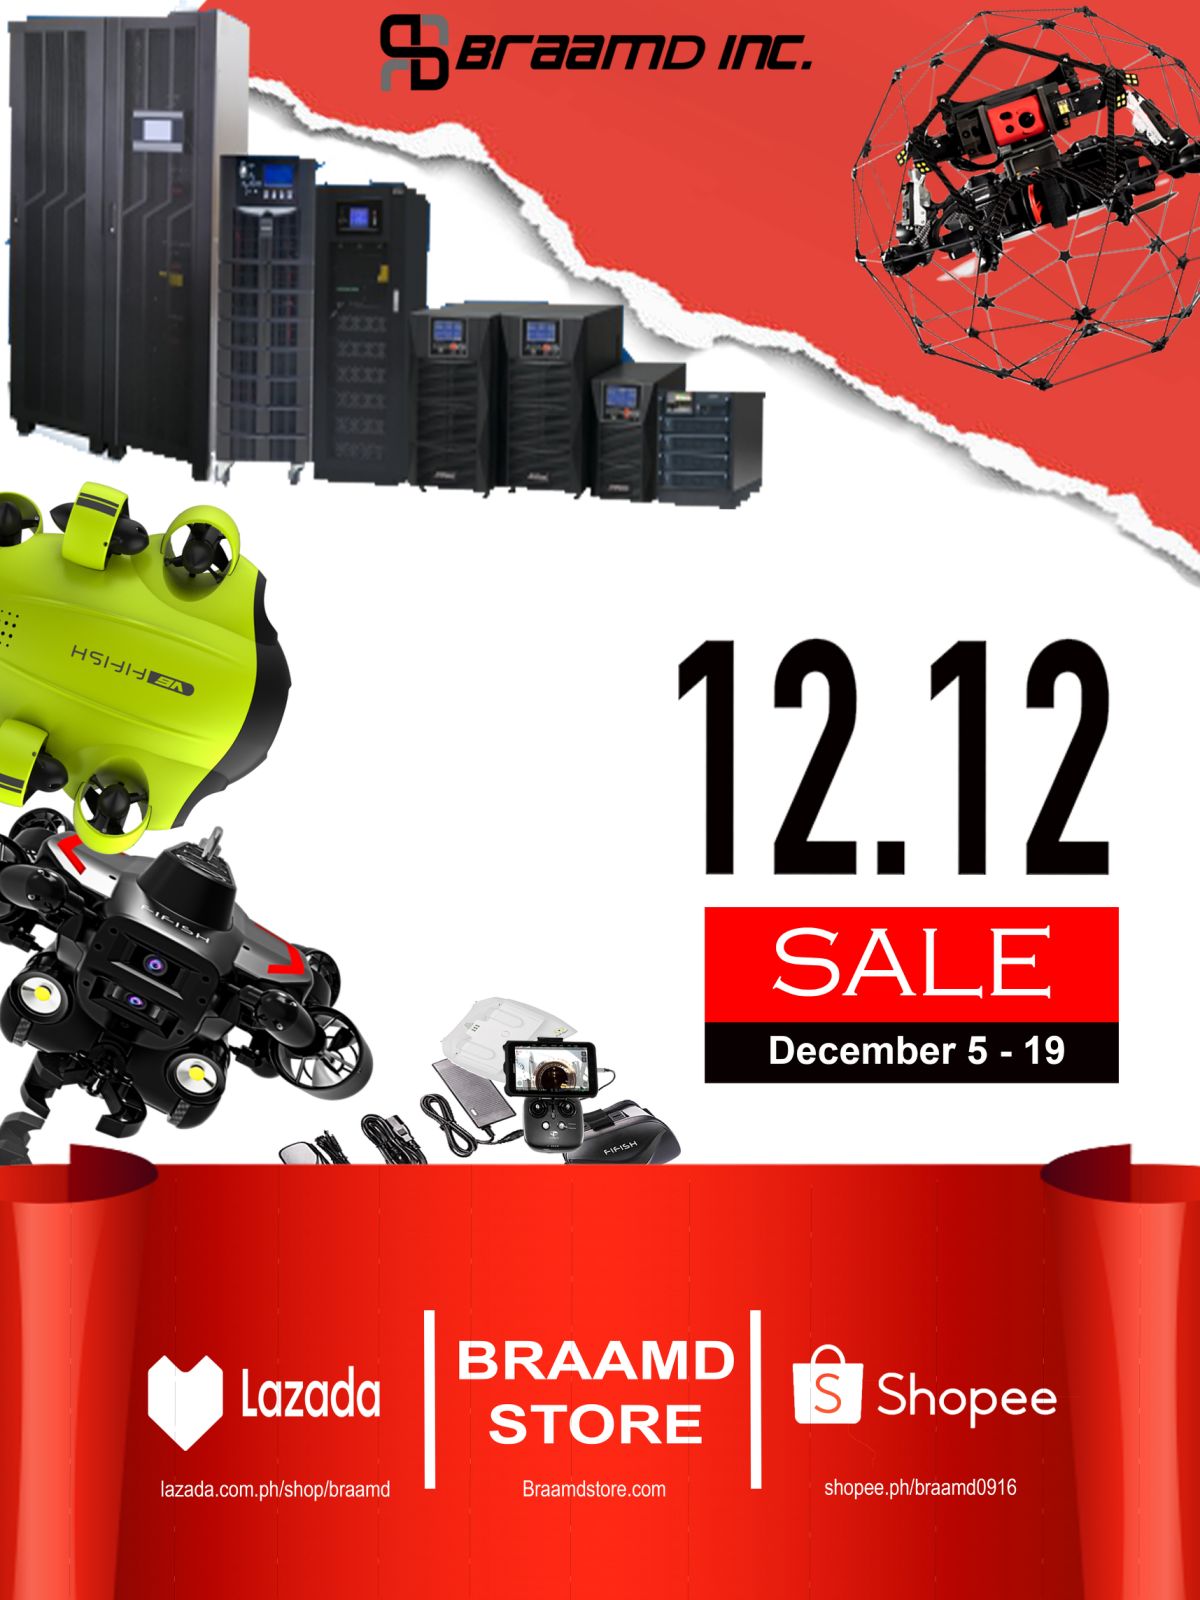 Braamd Industrial Stores - It's the Holidays, and it's 12/12!